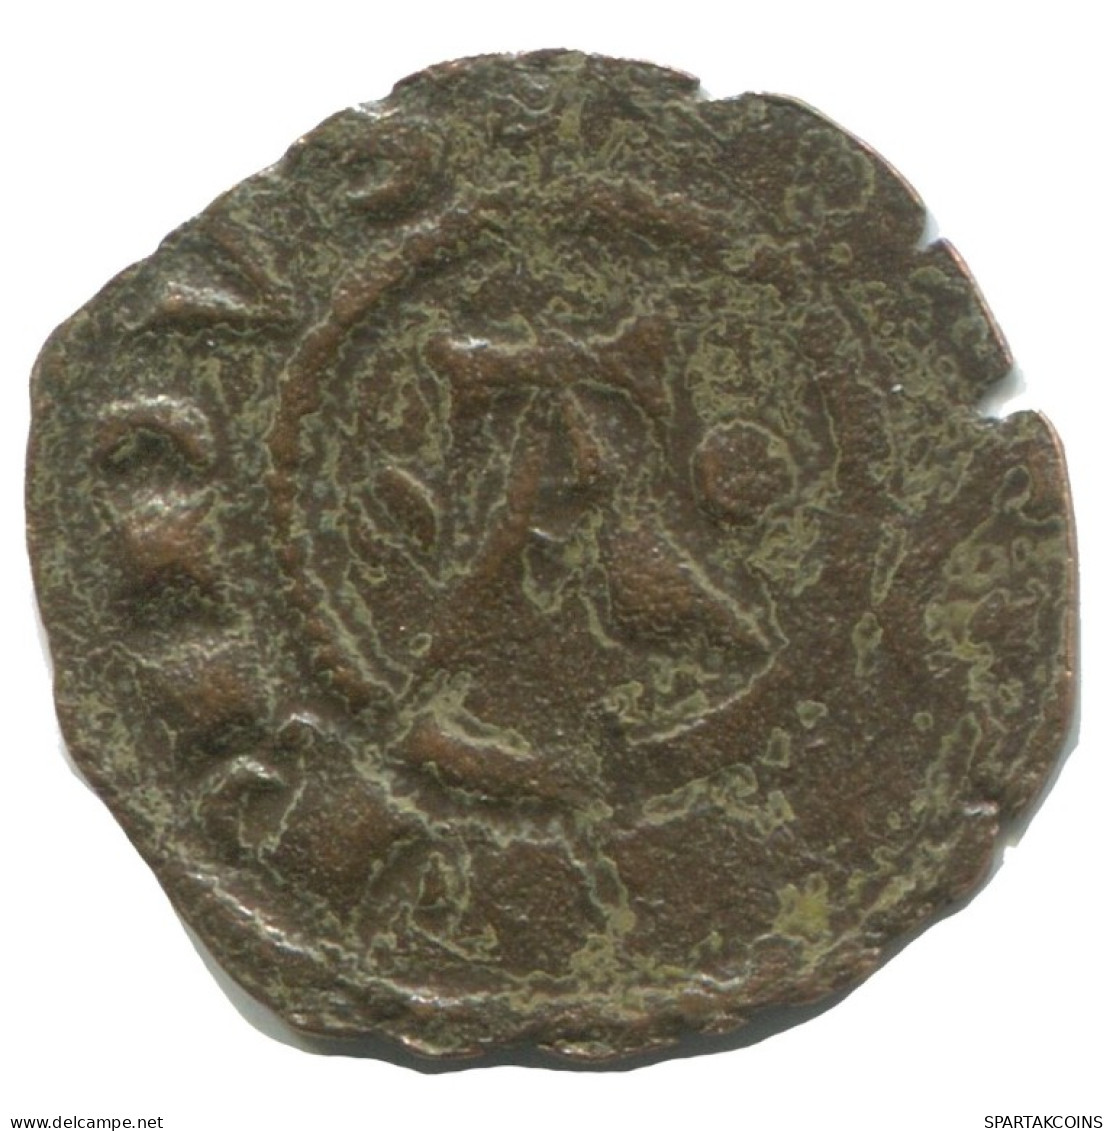 CRUSADER CROSS Authentic Original MEDIEVAL EUROPEAN Coin 0.5g/15mm #AC356.8.E.A - Other - Europe